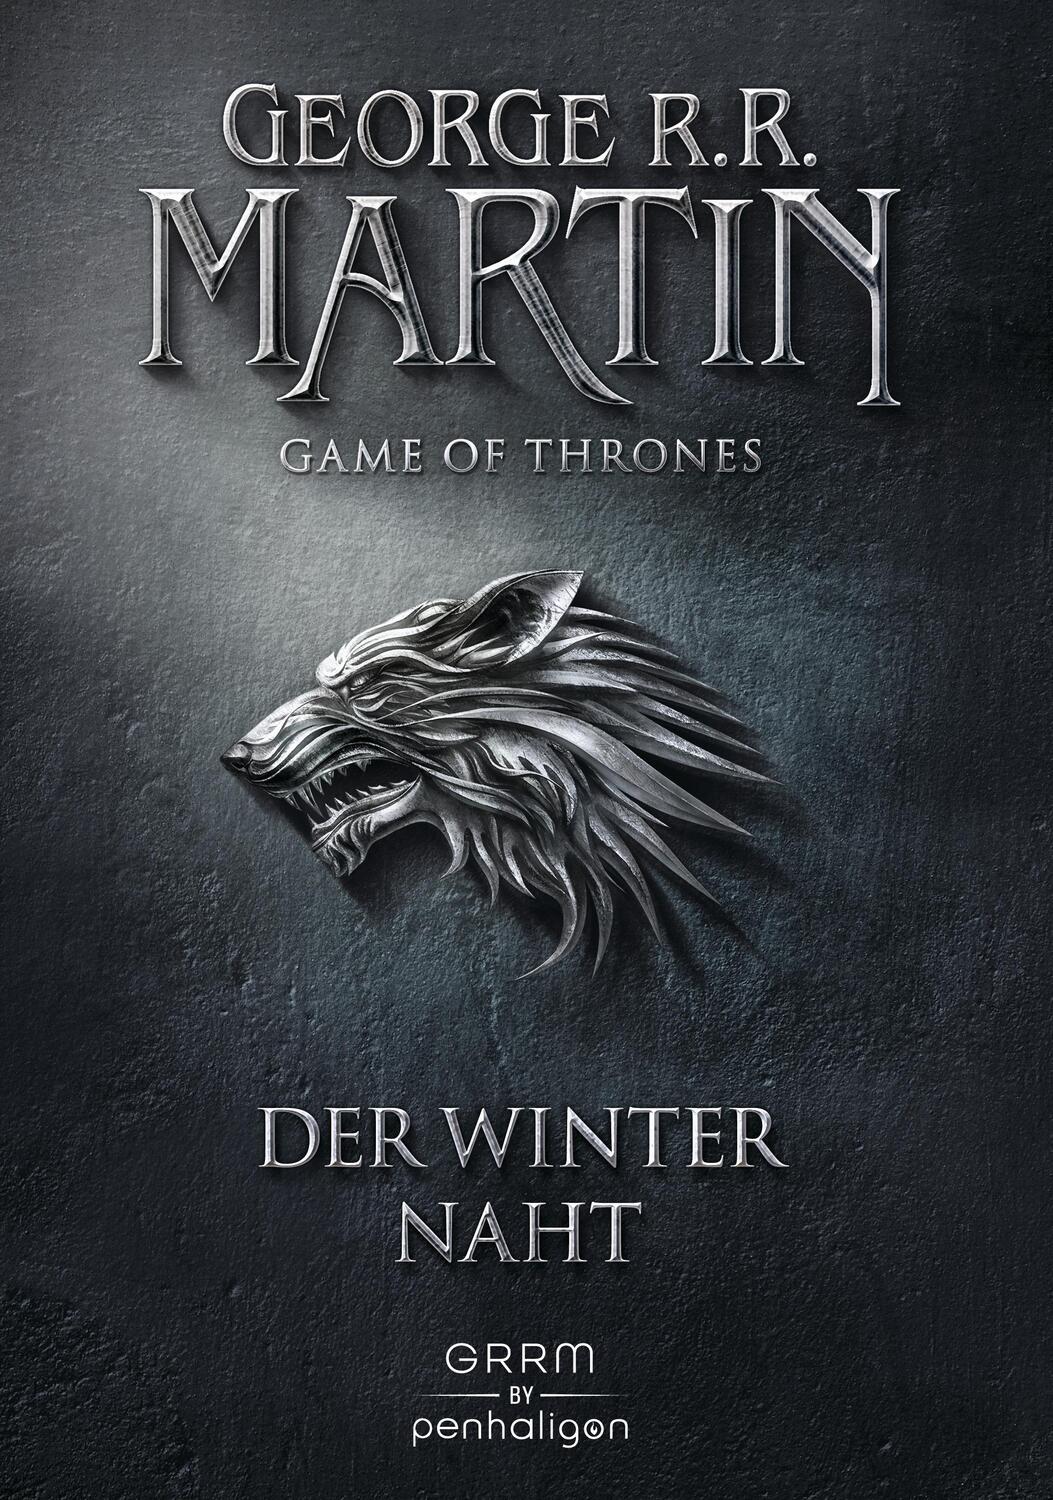 Game of Thrones 1 - Martin, George R. R.